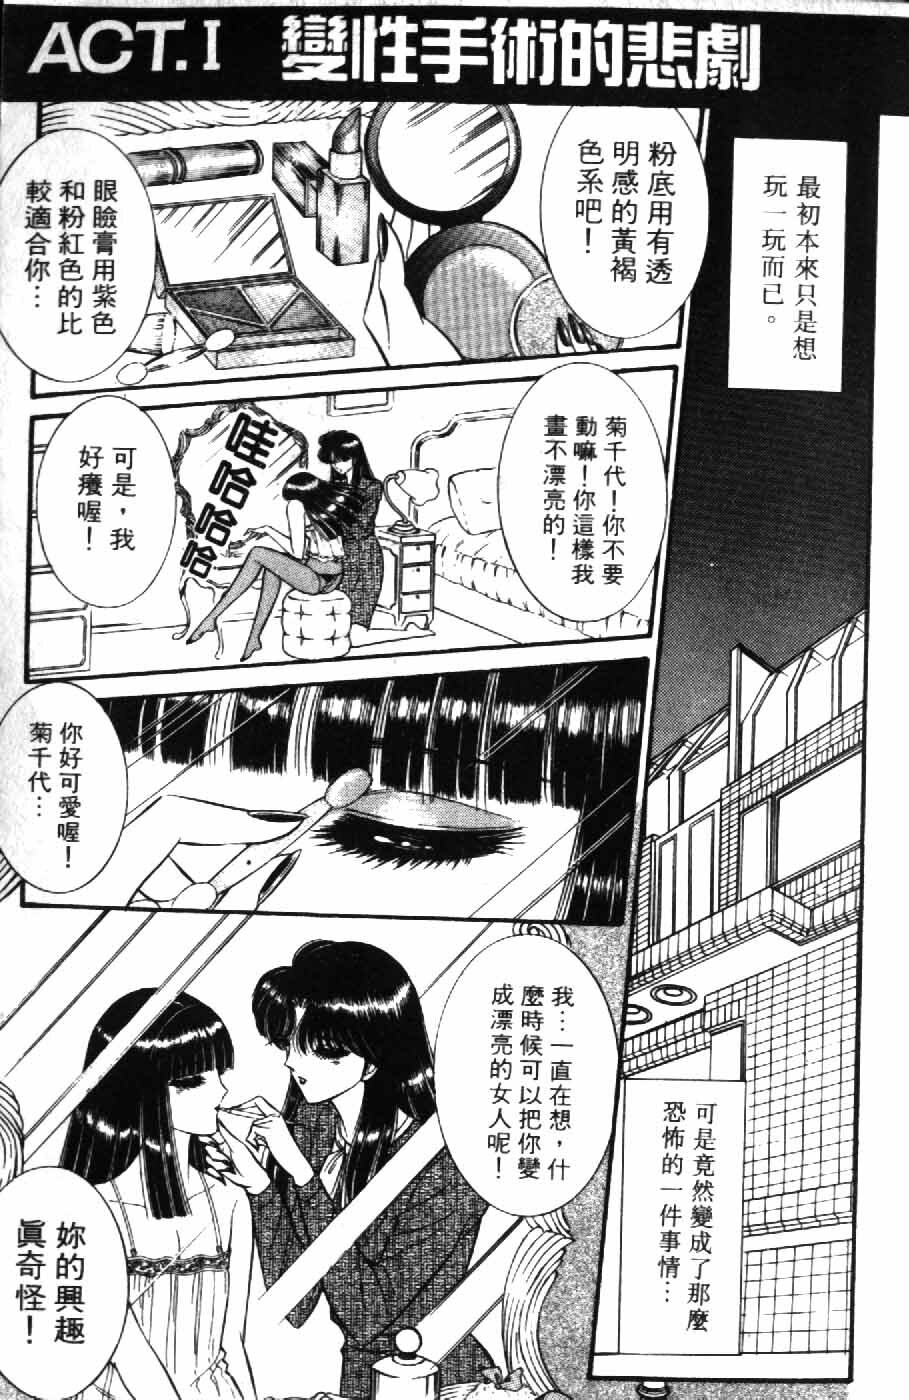 [Senno Knife] Ouma ga Horror Show 1 - Trans Sexual Special Show 1 | 顫慄博覽會 1 [Chinese] page 3 full